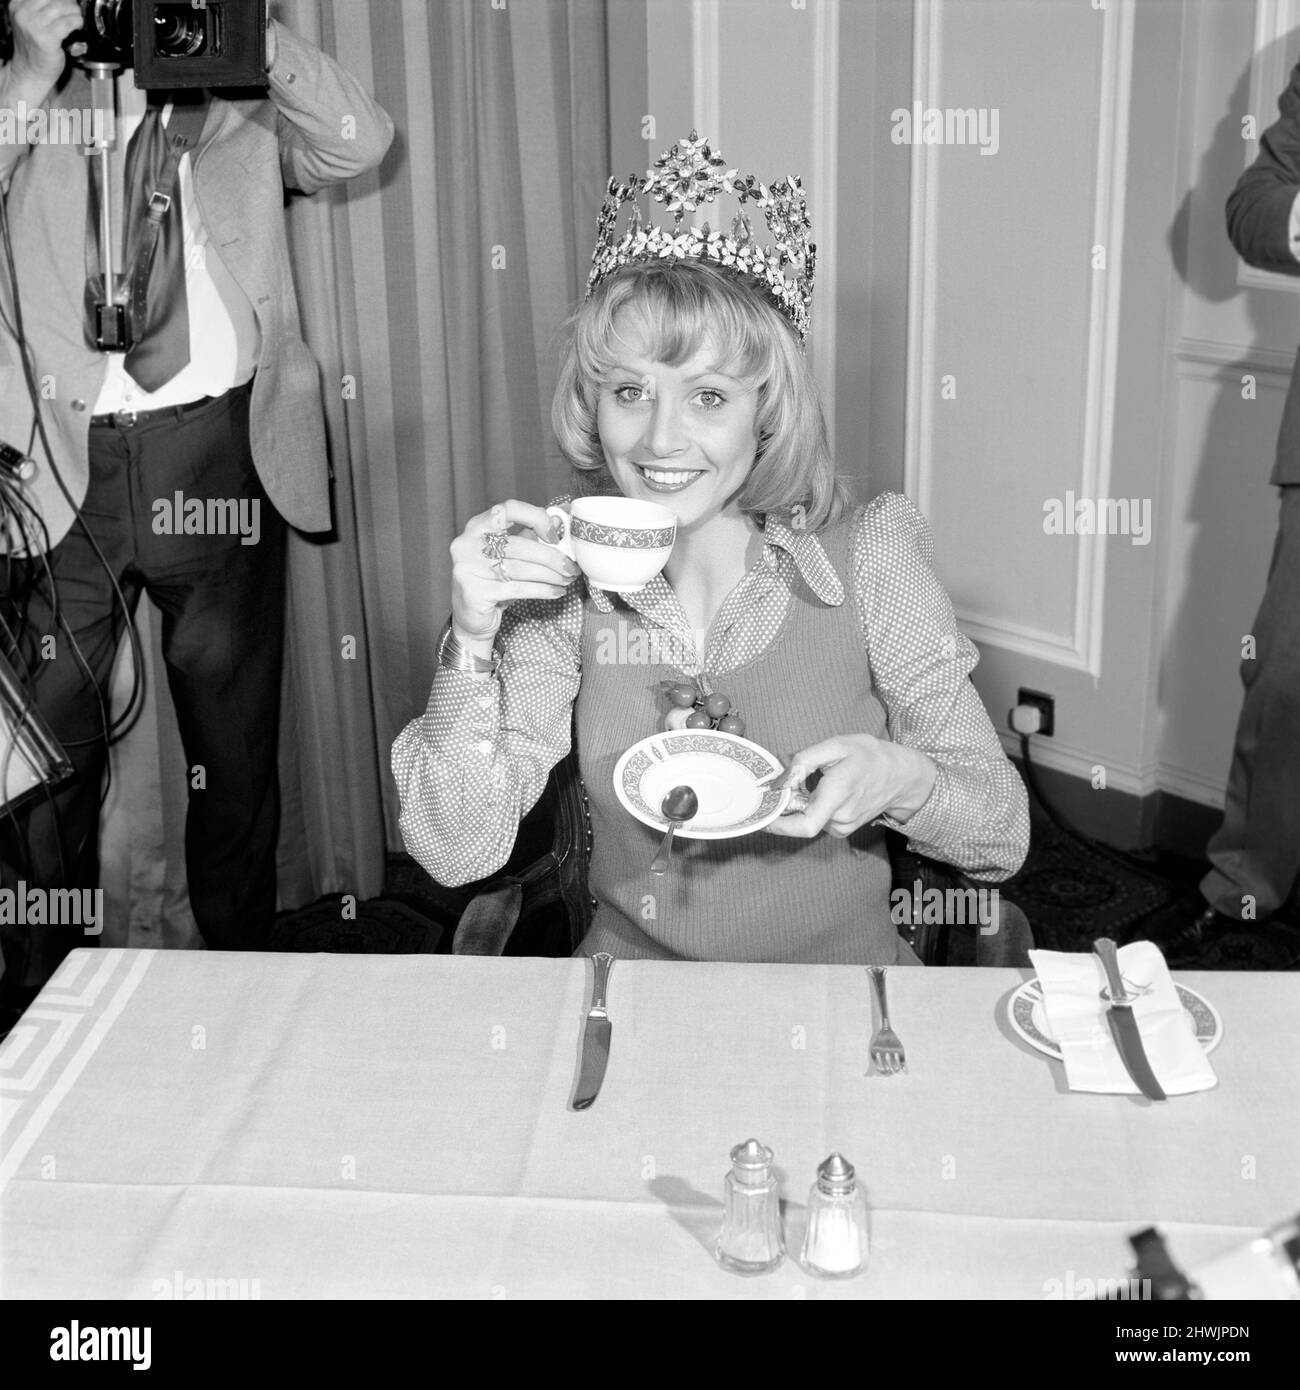 Miss World, 1972: Belinda Green: 20 year old Belinda Green, a blonde haired, blue eyed, model from Australia, won the Miss World Contest. Belinda’s favourite hobby is cooking. Belinda at the Photocall for Miss World, at the Britannia Hotel. December 1972 72-11299-004 Stock Photo